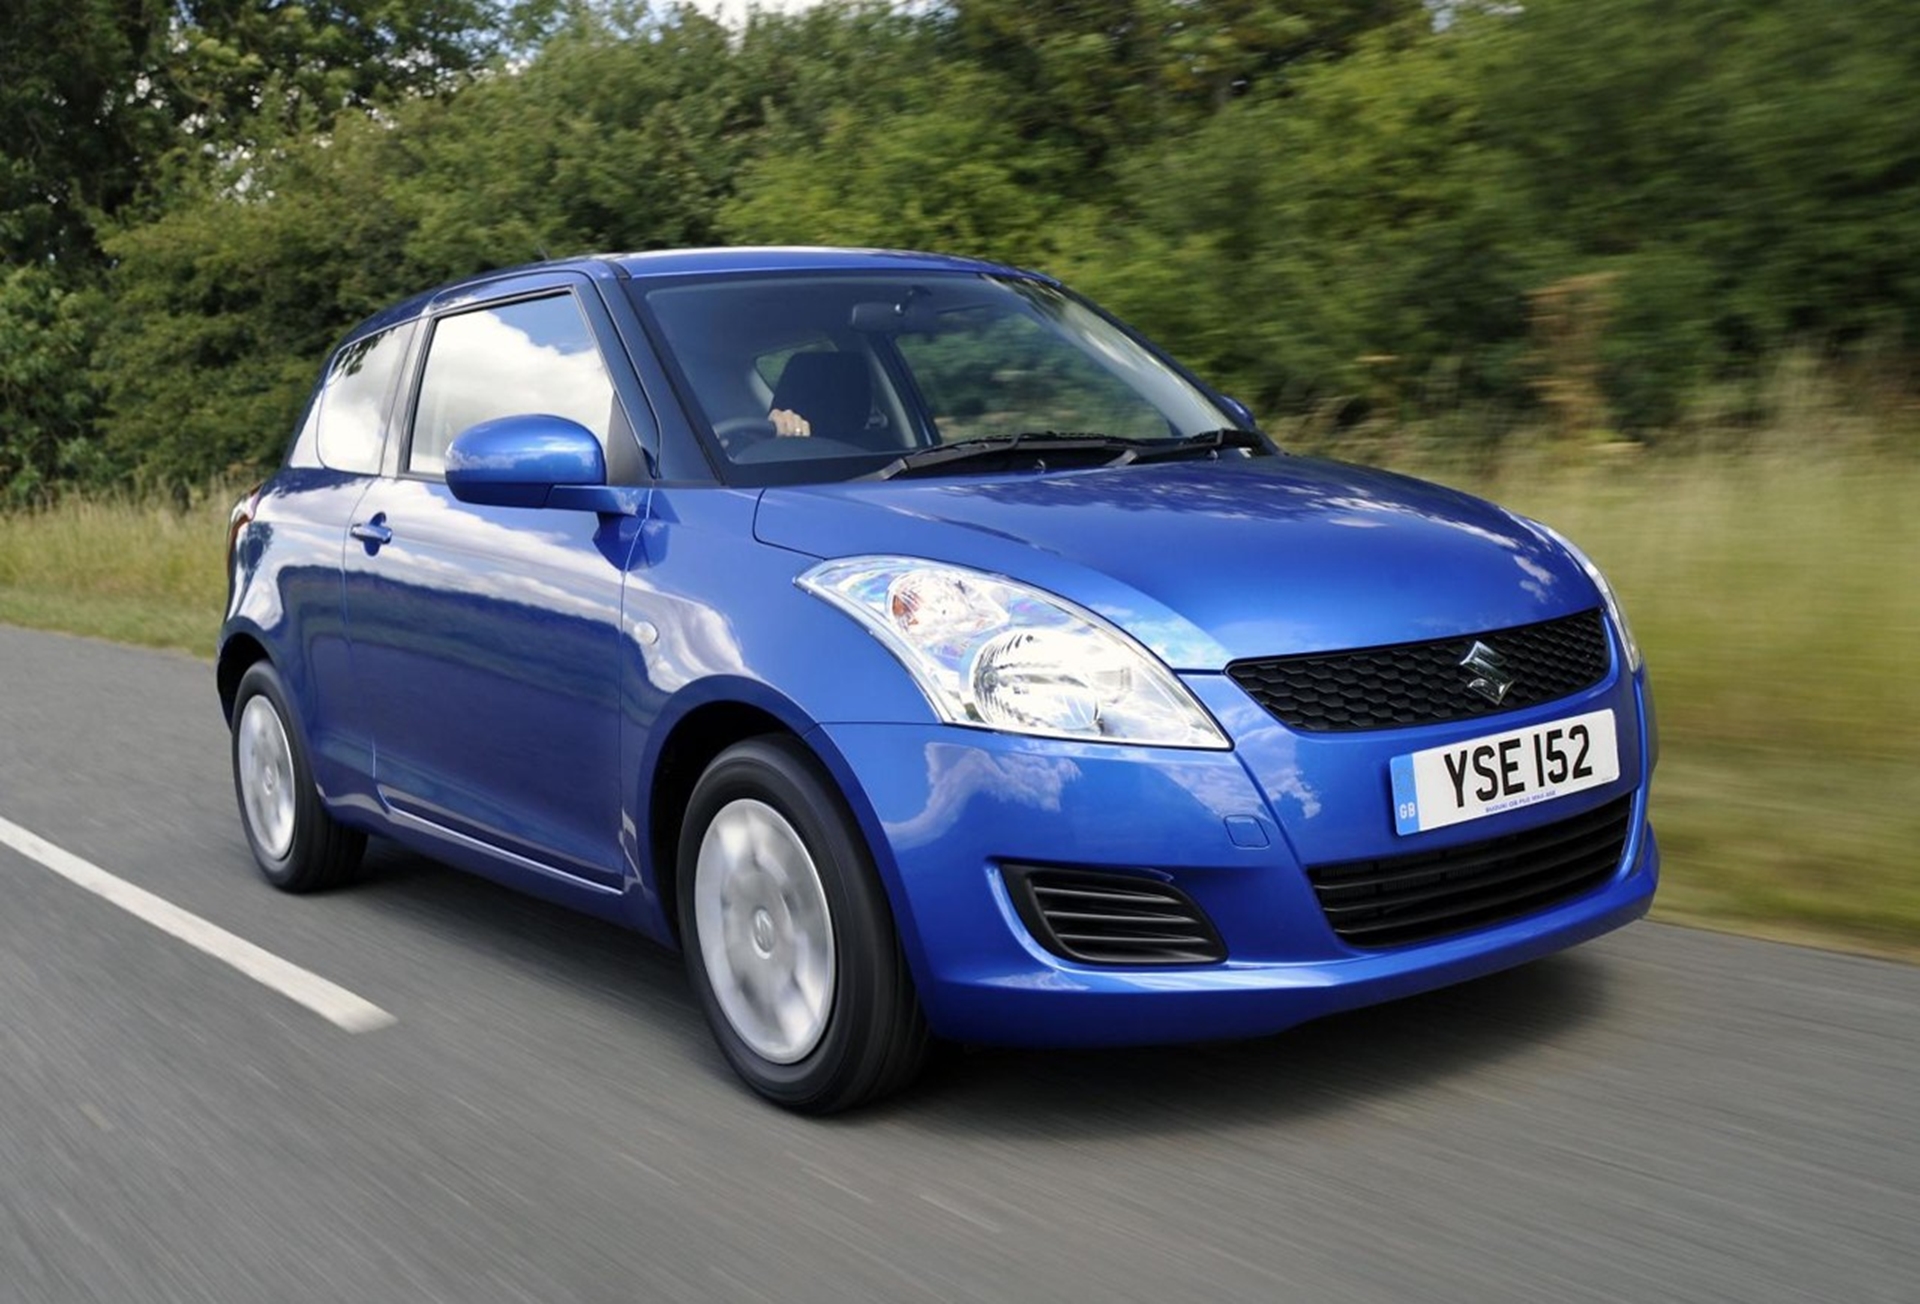 NEWS FROM SUZUKI FINANCIAL SERVICES – LAUNCH OF CONTRACT HIRE